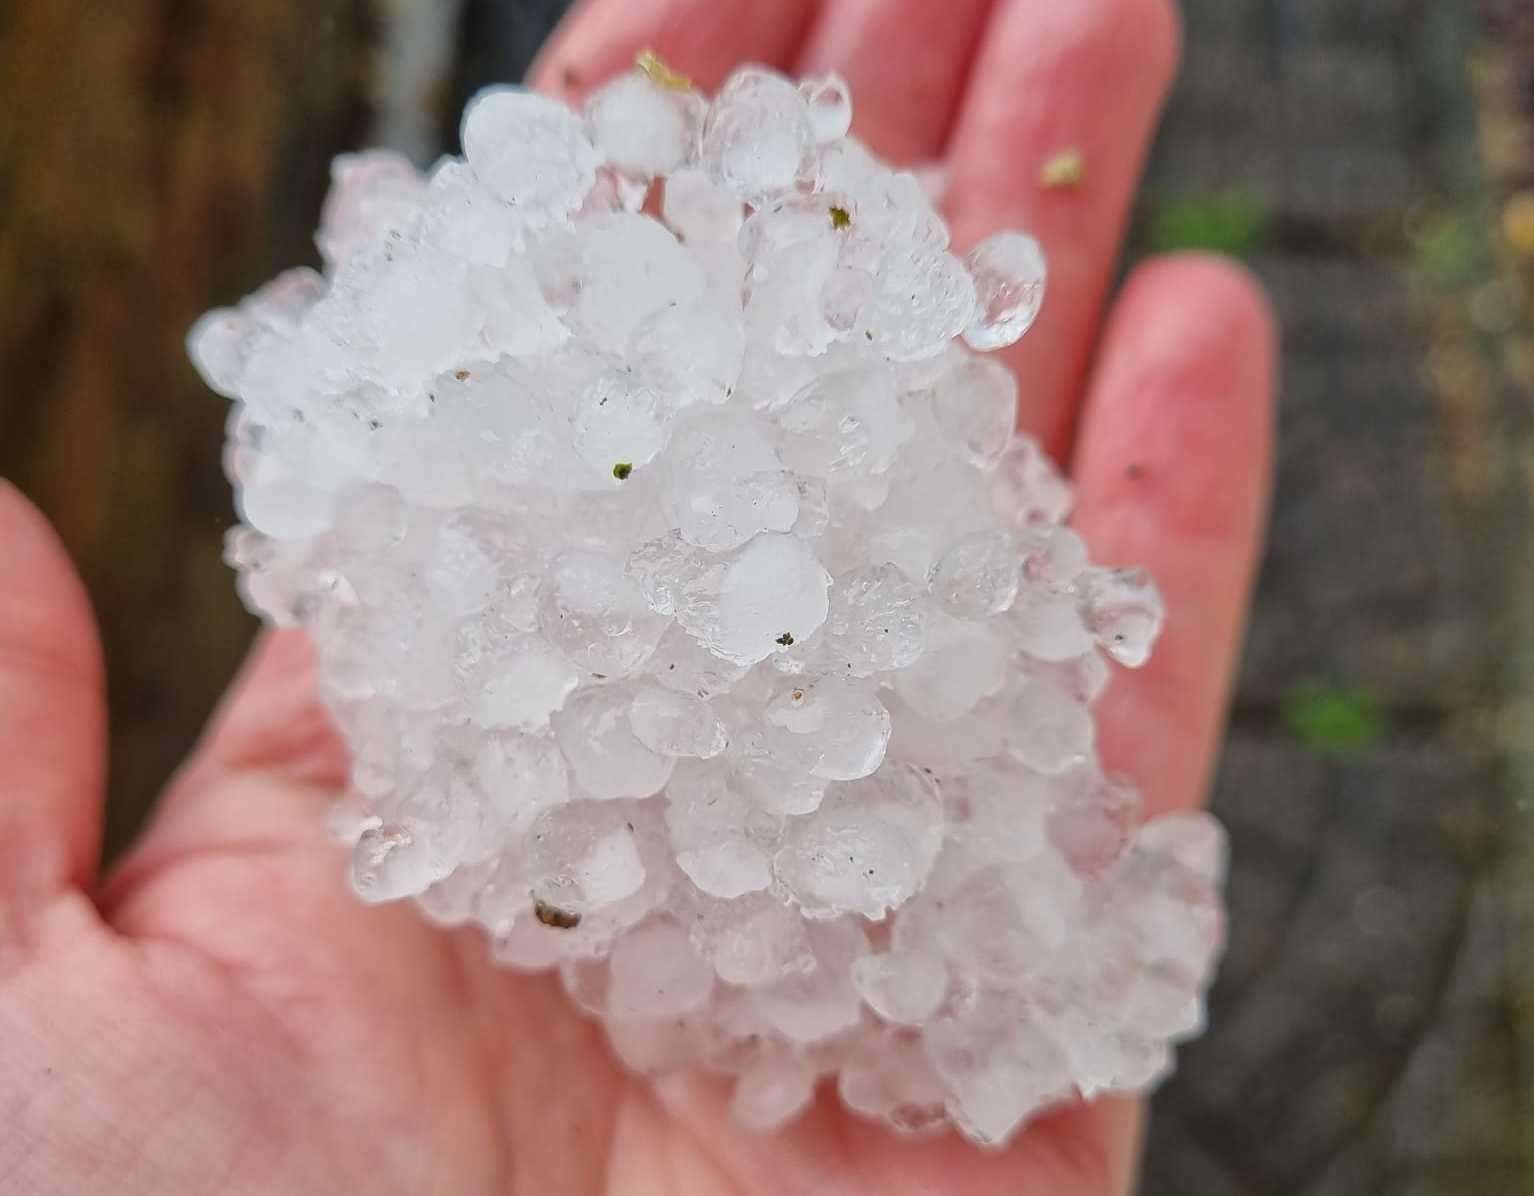 Giant hail stones were found in Cliffe after the storm. Picture: Teri Ella Graham